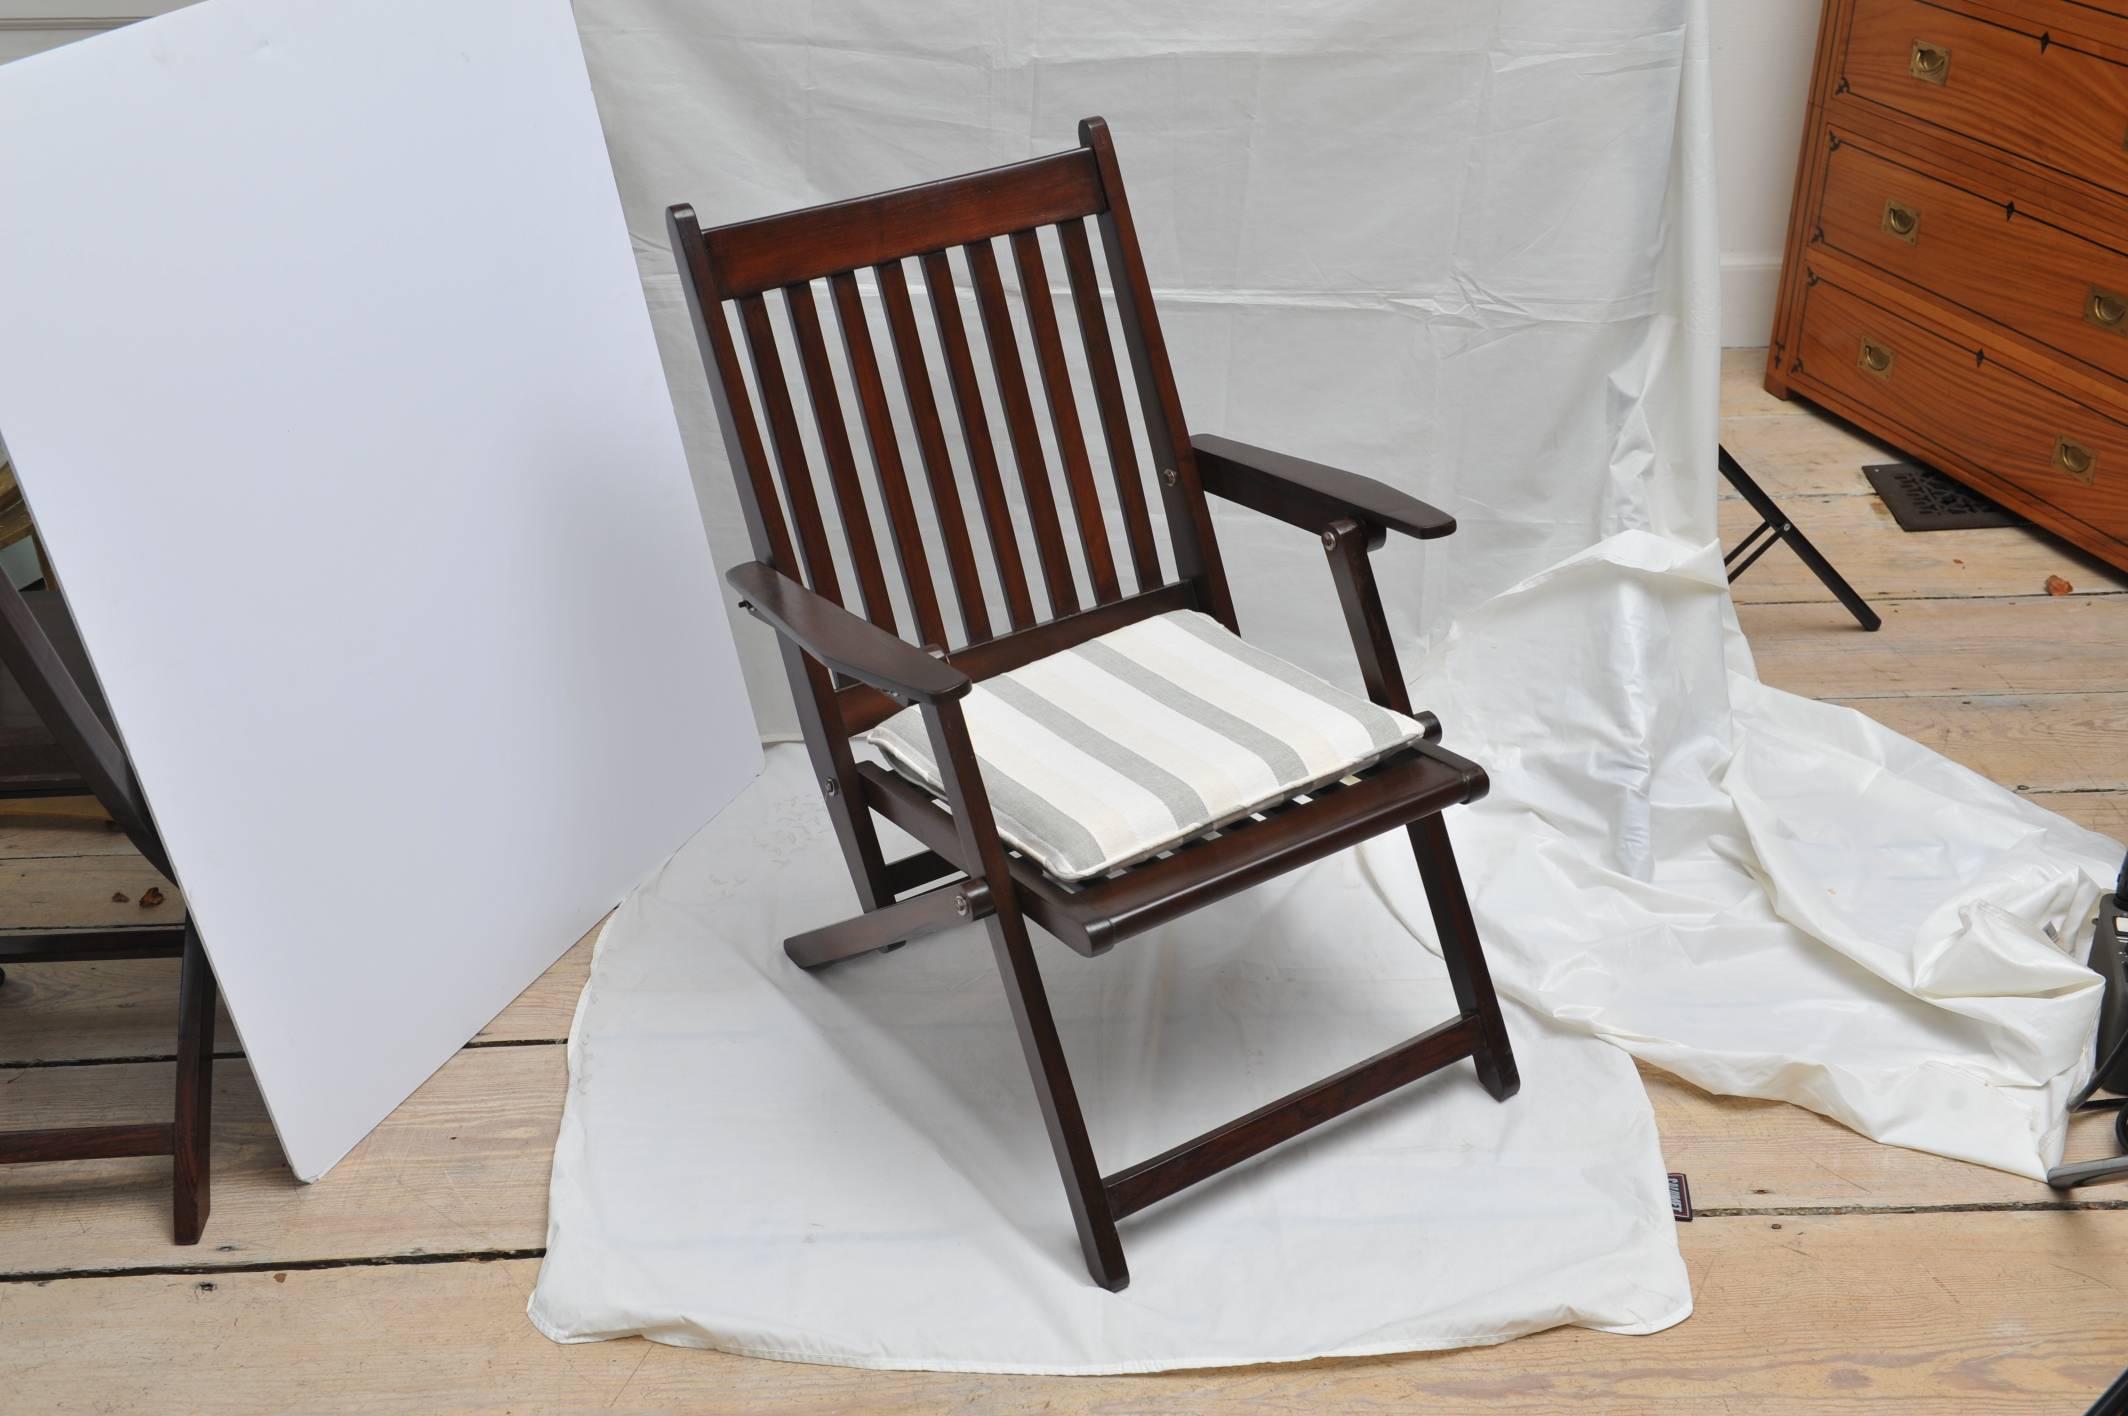 Pair of early-mid 1900s rosewood, folding steamer chairs. Used on the decks of British steamer ships traveling to and from the Colonies. Custom-made seat cushions in a soft white and grey stripe, zippered. A subtle recline making them comfortable